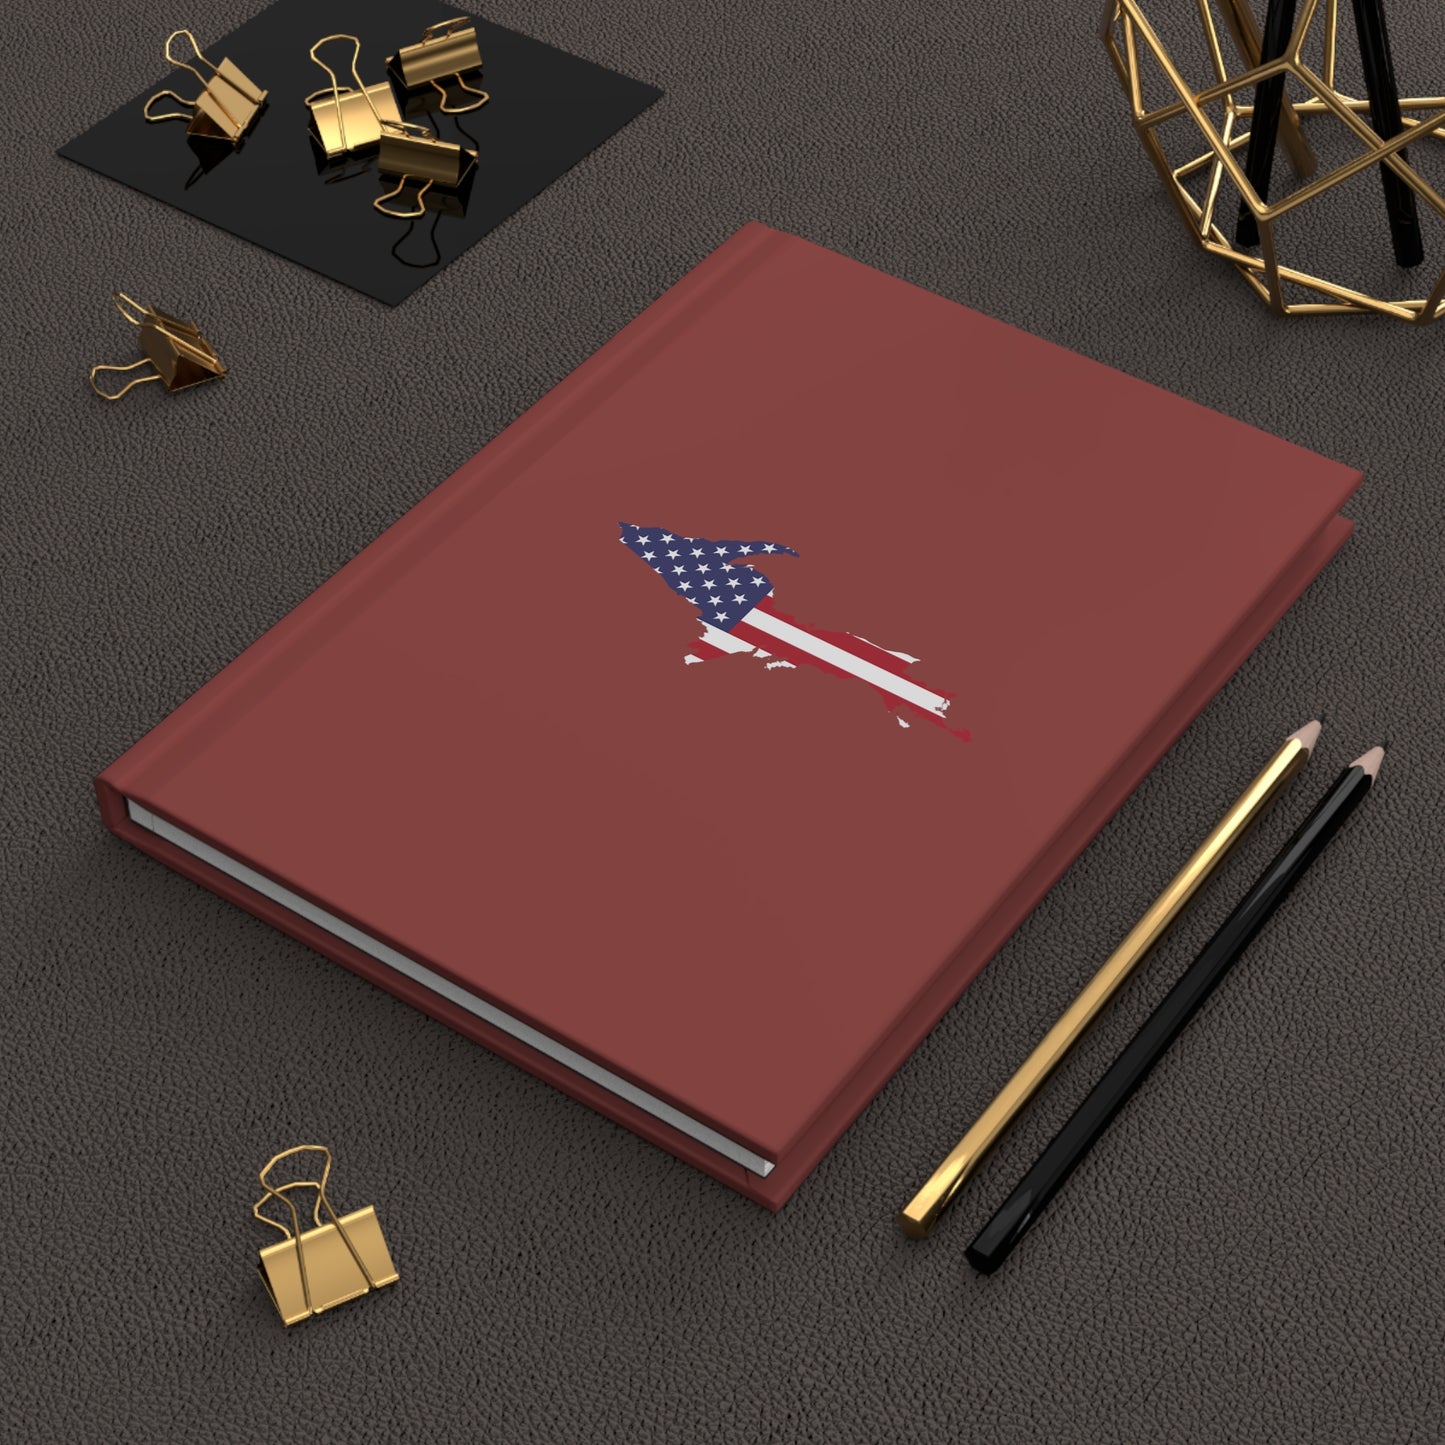 Michigan Upper Peninsula Hardcover Journal (w/ UP USA Flag) | Ruled - Ore Dock Red